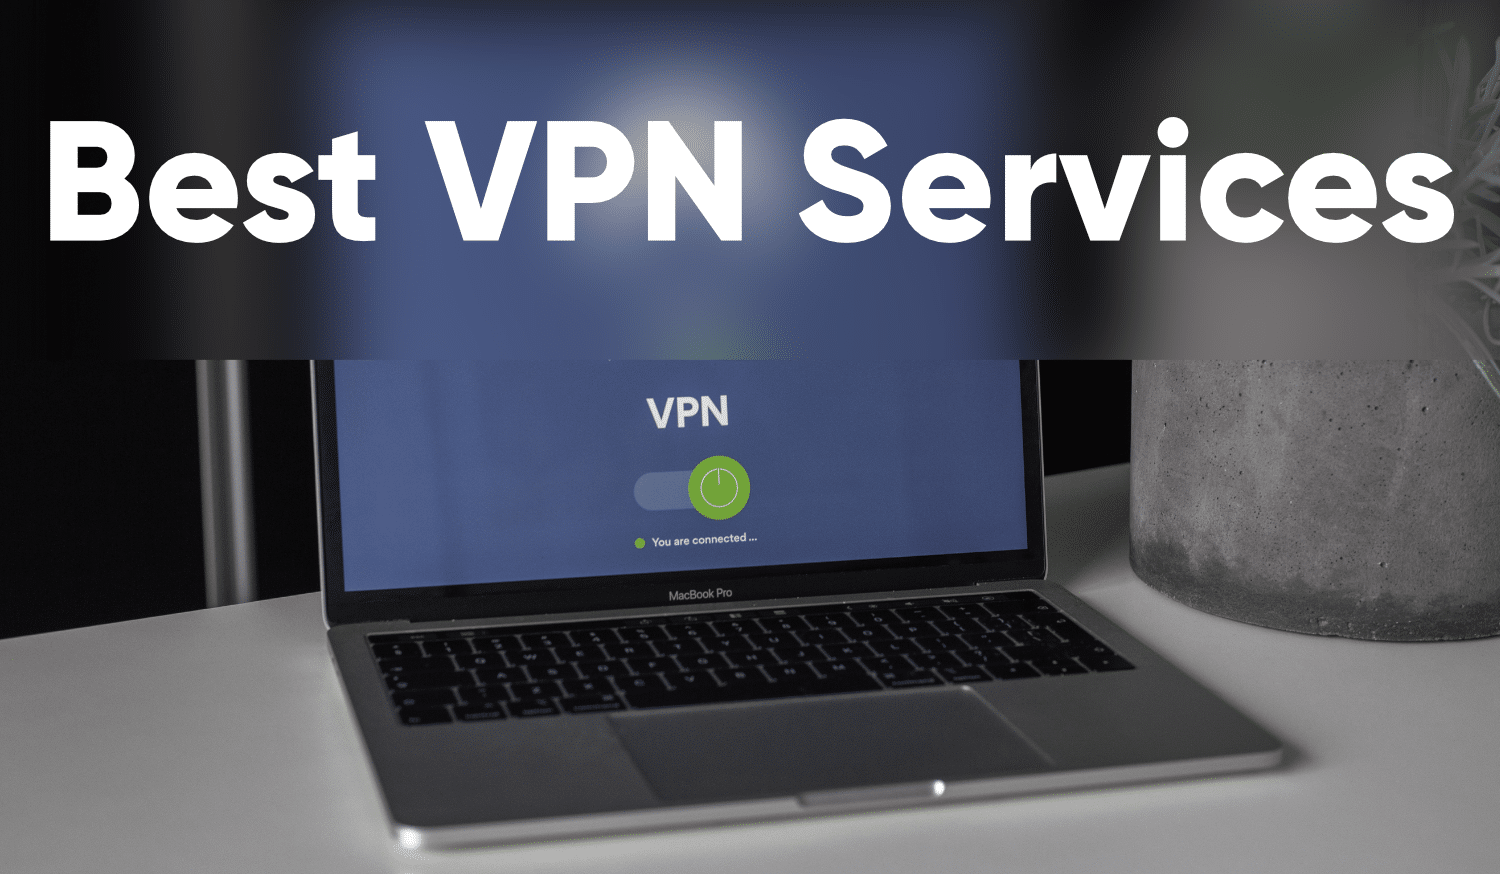 Points to be considered before choosing the best VPN Service provider